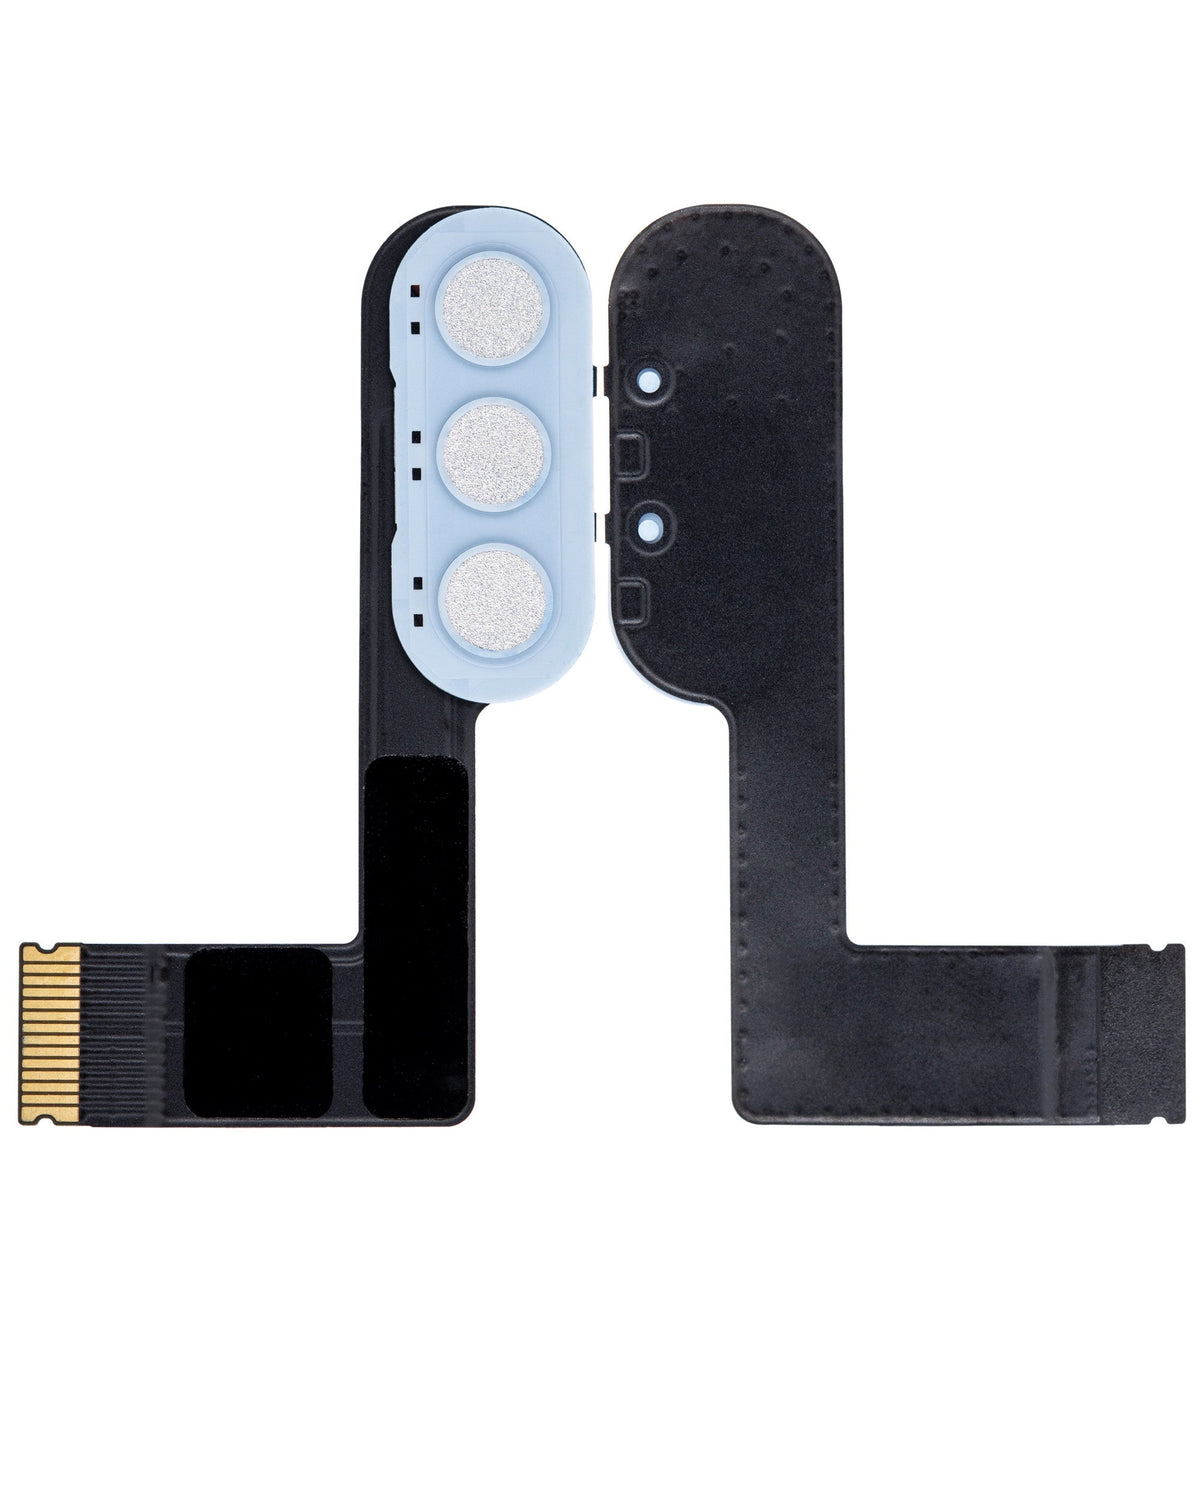 KEYBOARD FLEX CABLE COMPATIBLE FOR IPAD AIR 4/5 - SKY BLUE